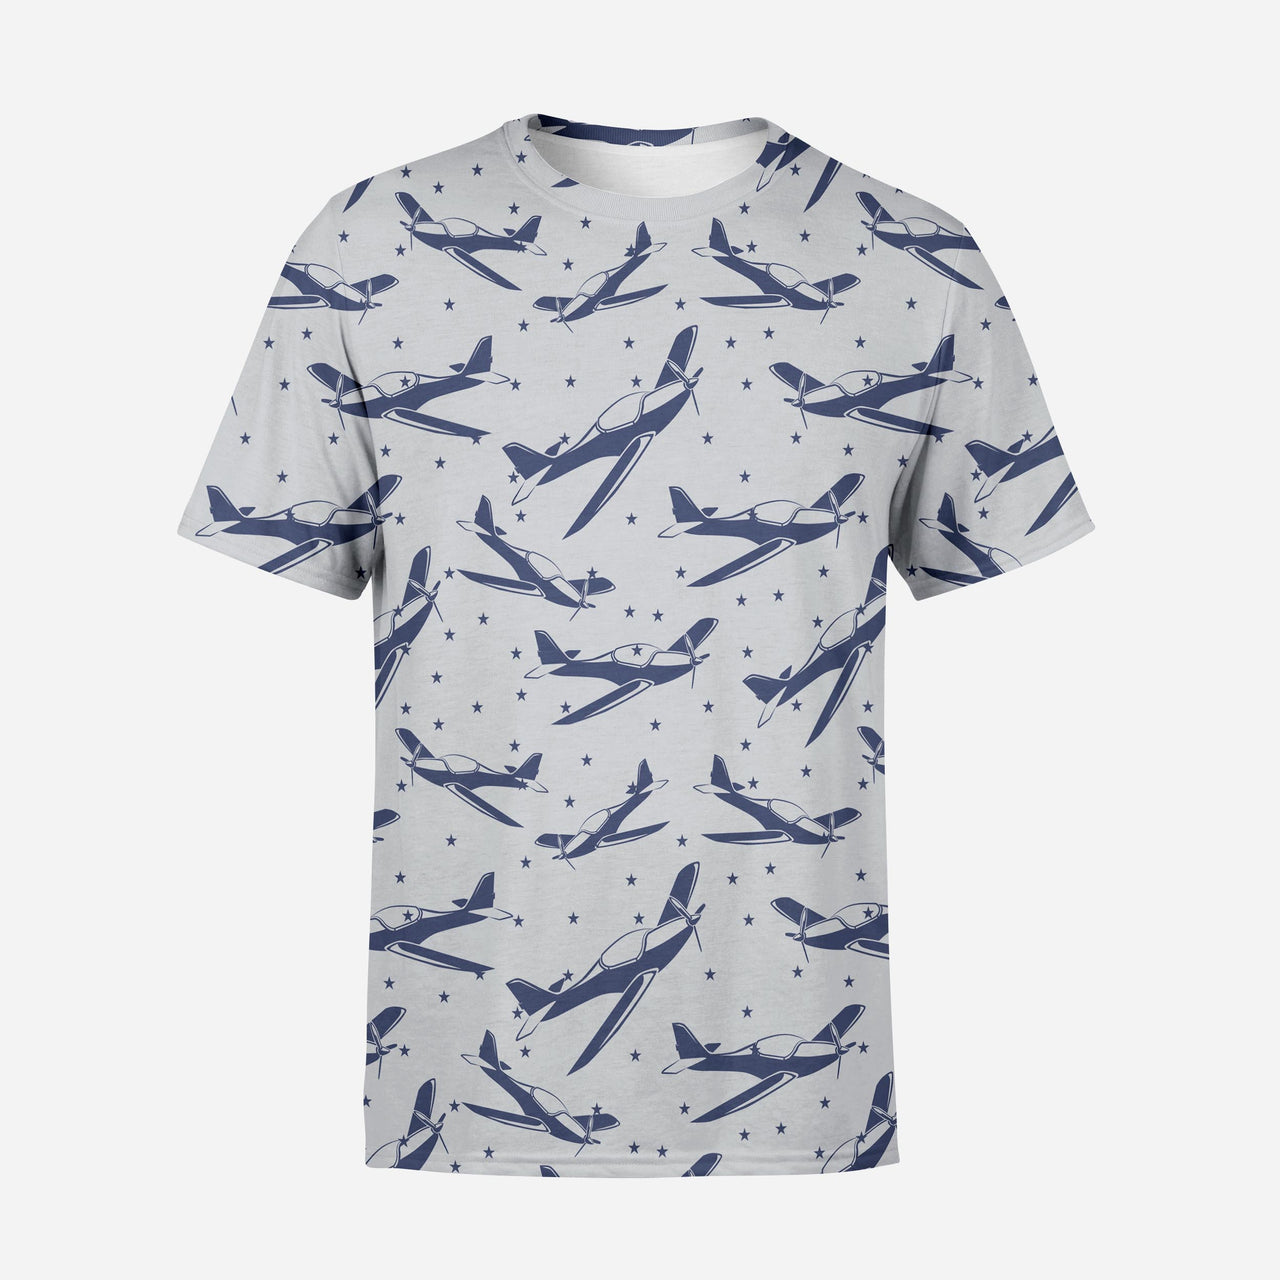 Propellers & Stars Printed 3D T-Shirts